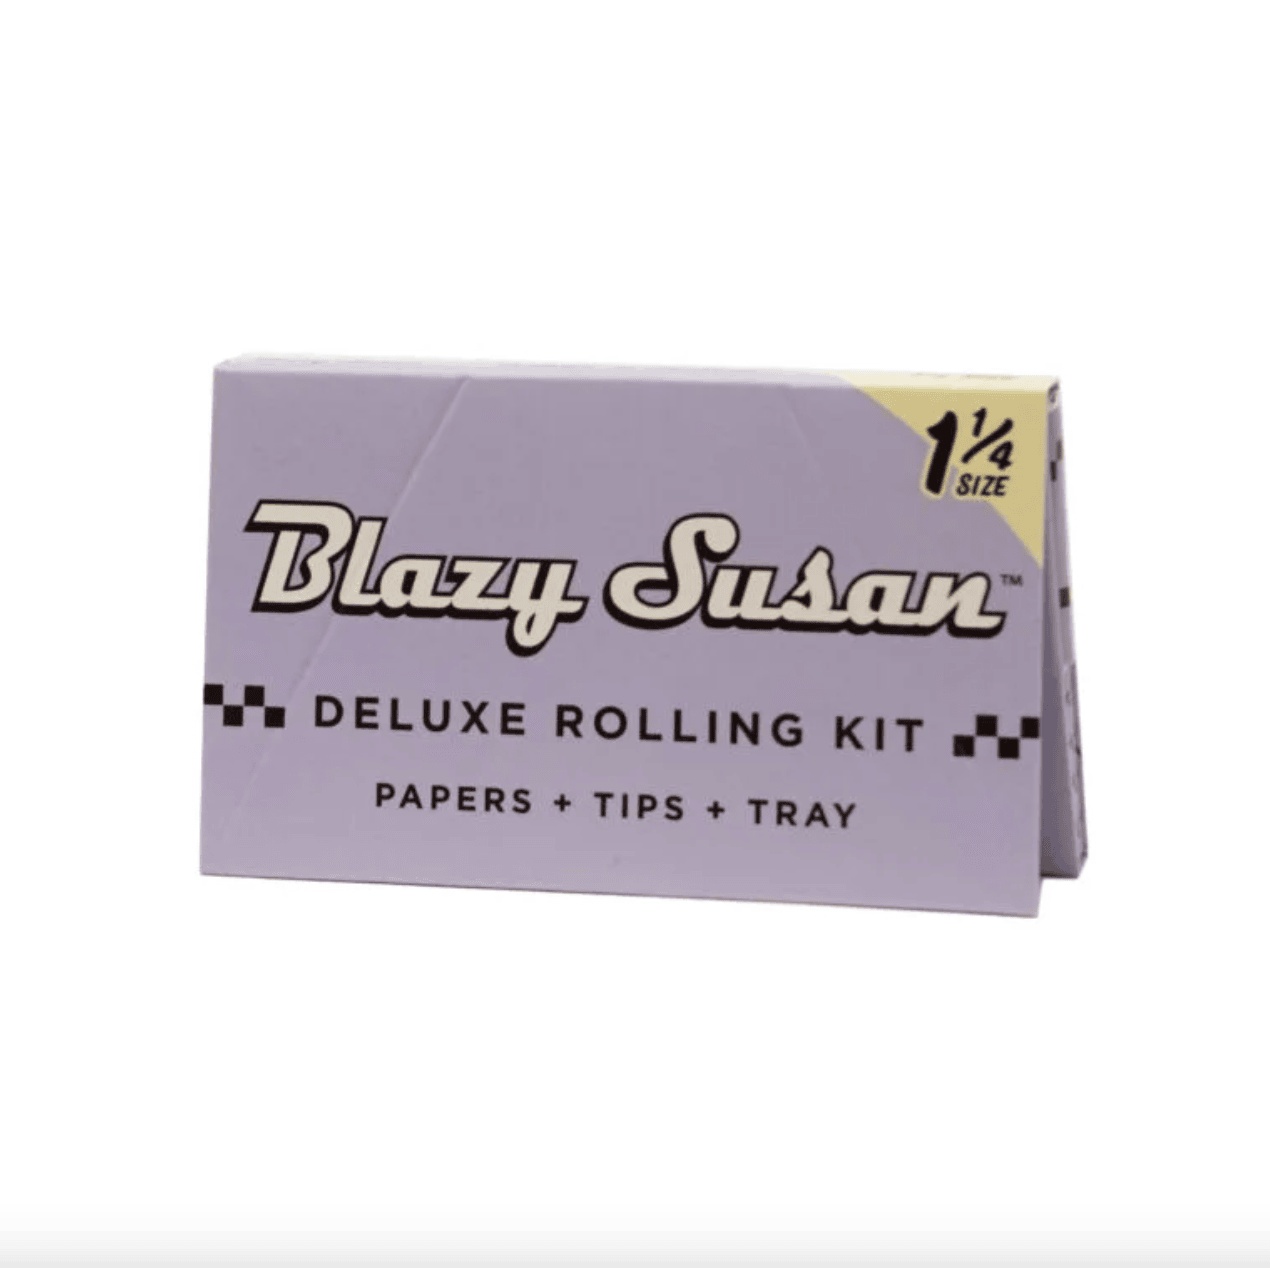 Blazy Susan Purple Deluxe Rolling Kit Papers + Tips + Trays 1 1/4" Size